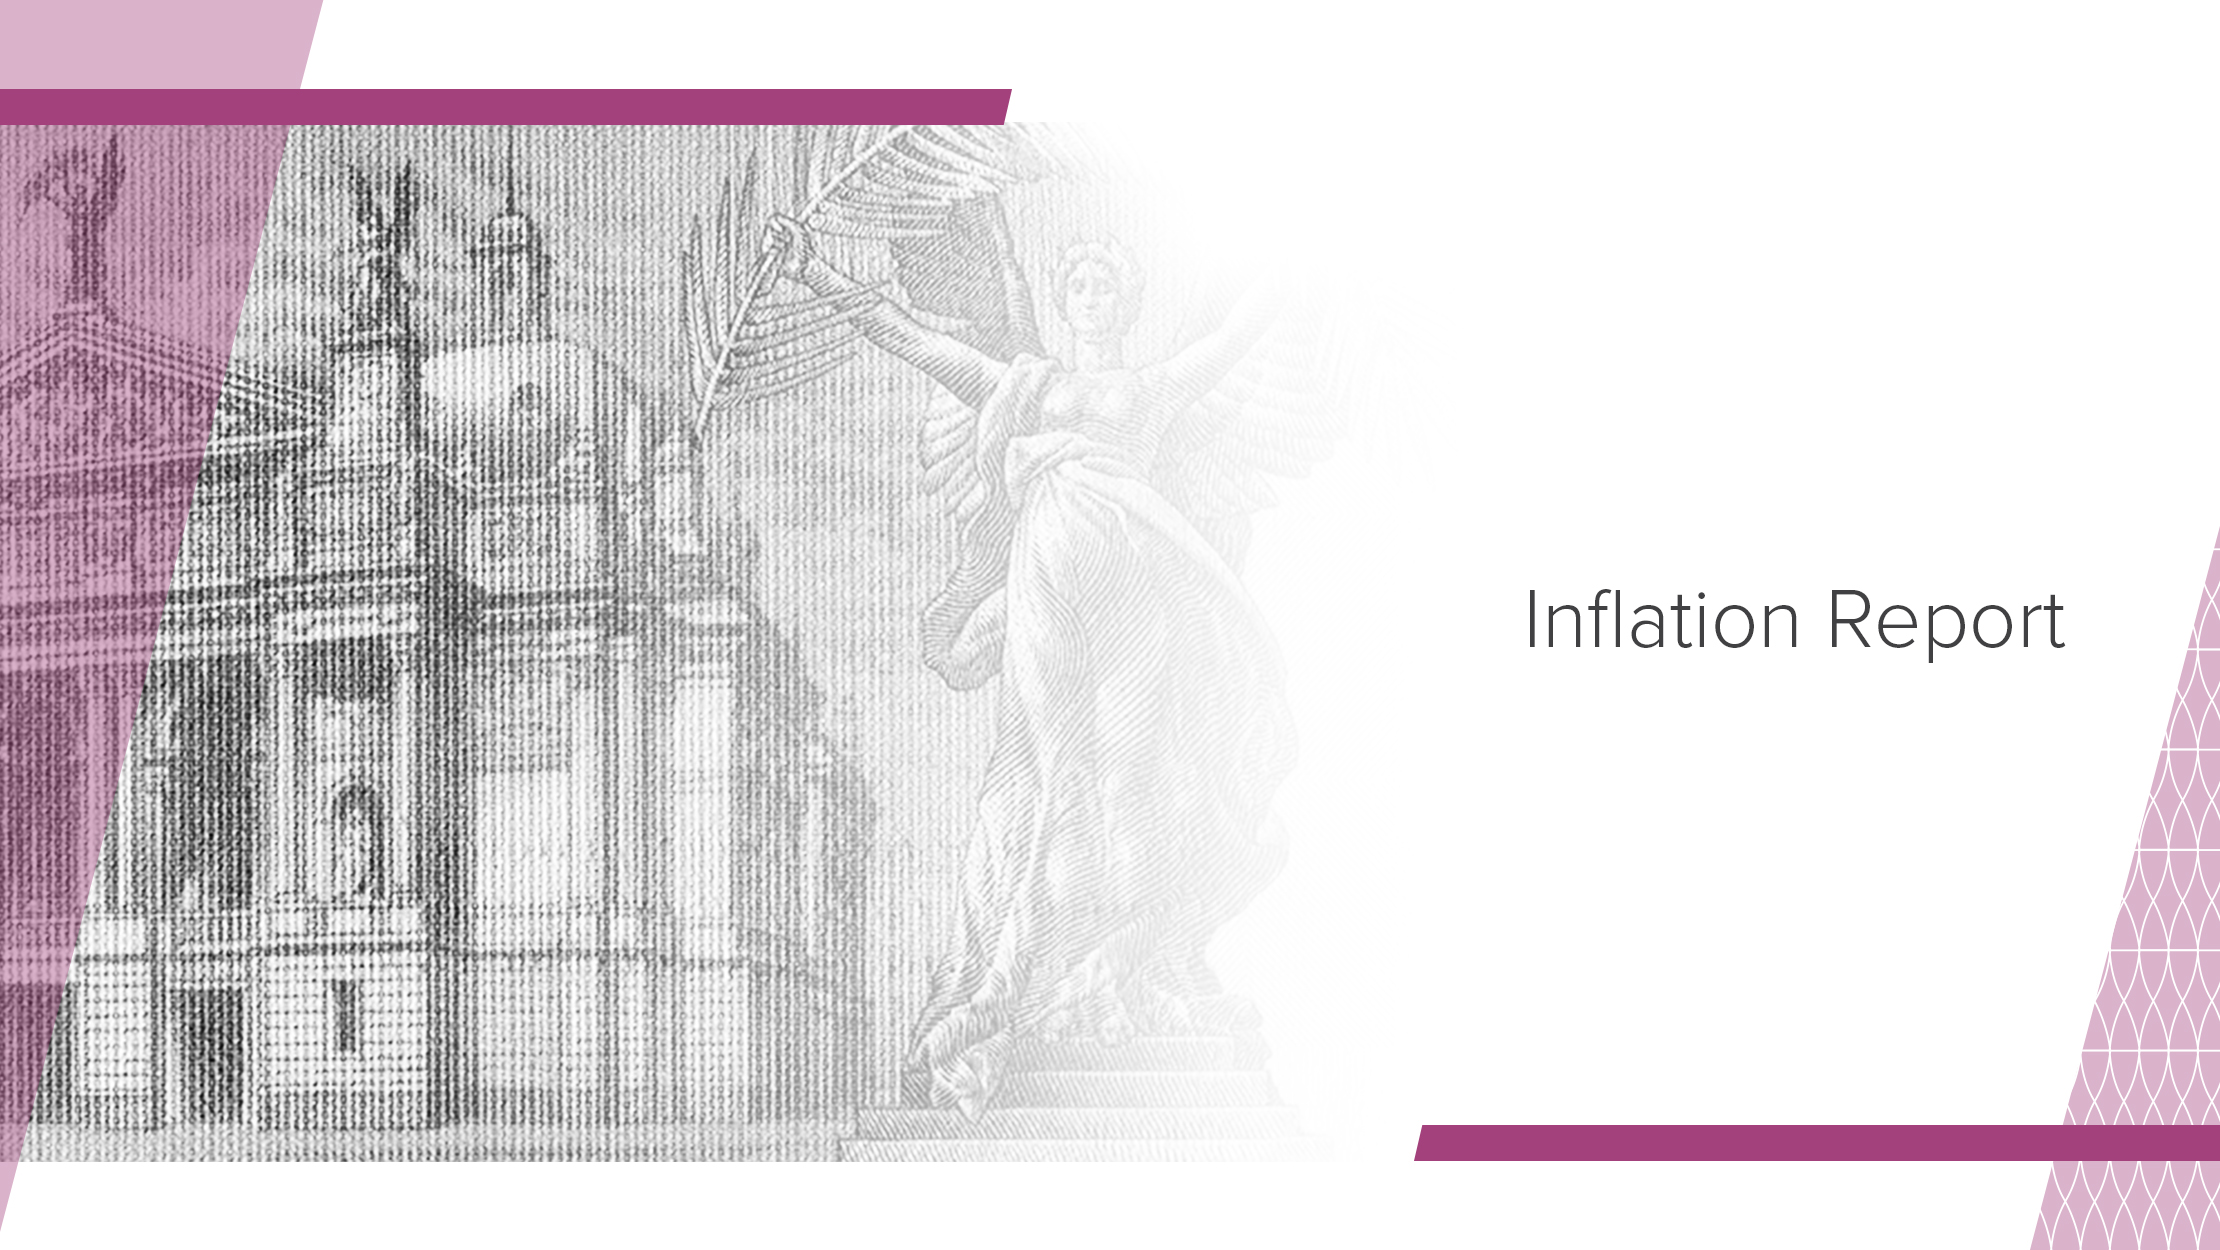 Inflation Report, October 2017